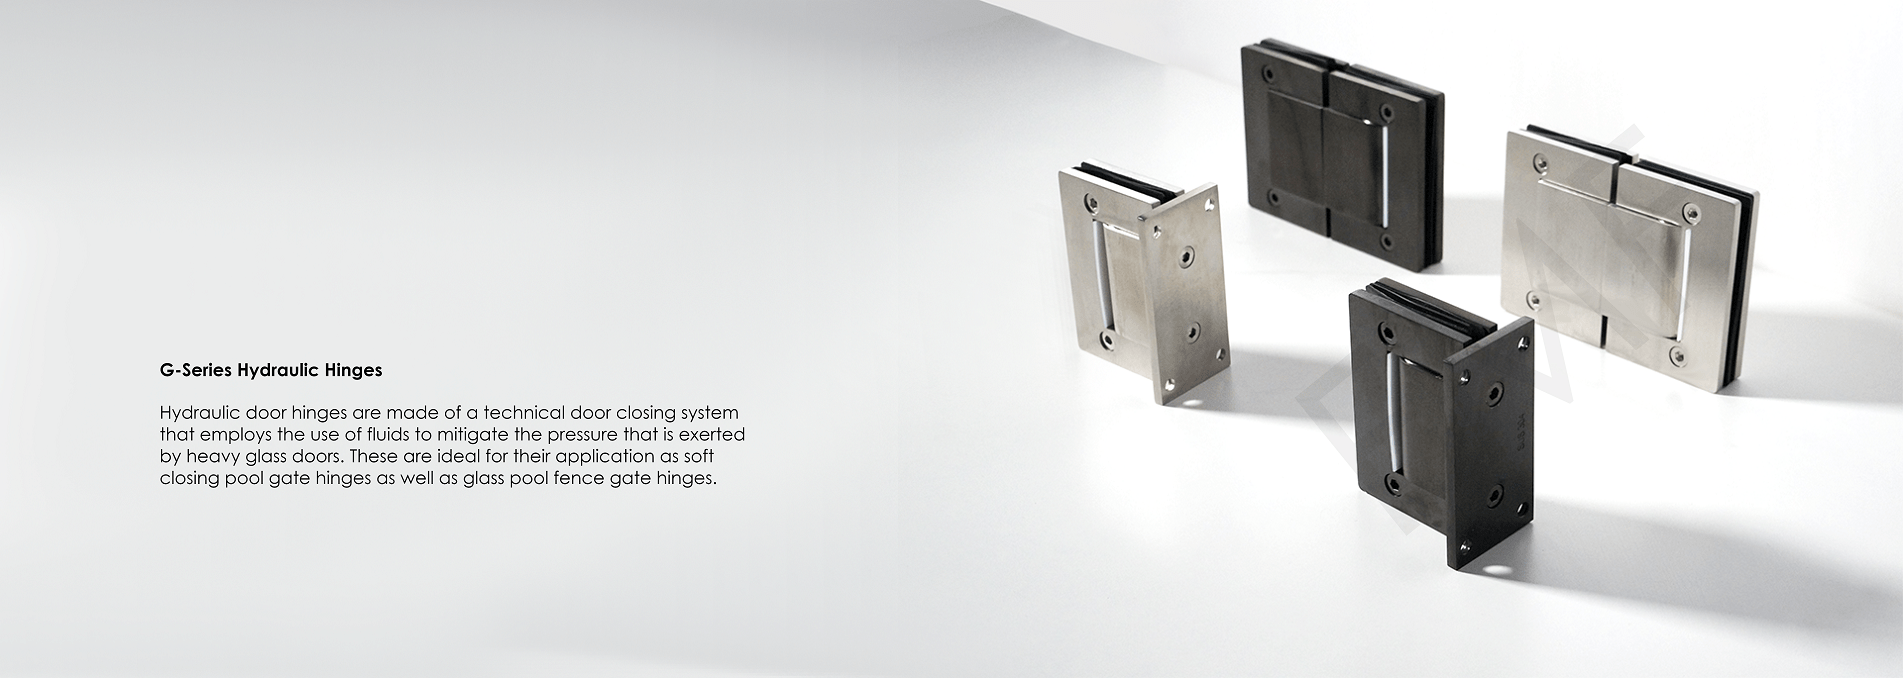 Minimalistic and elegant hydraulic hinges for seamless movement of the door